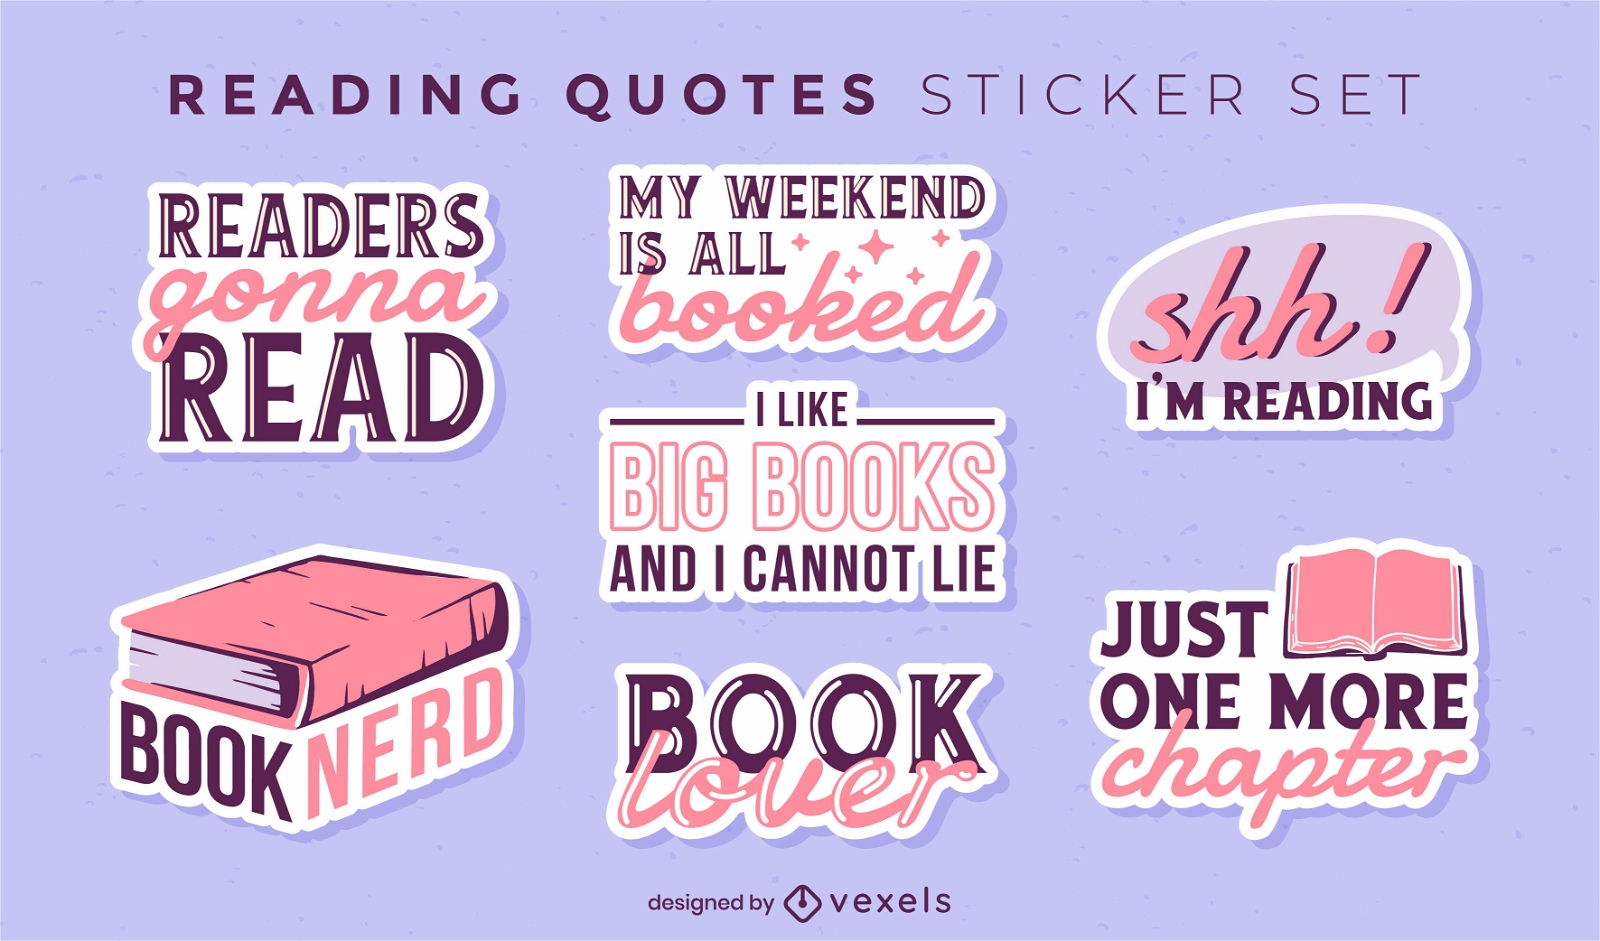 Reading books hobby sticker quotes set